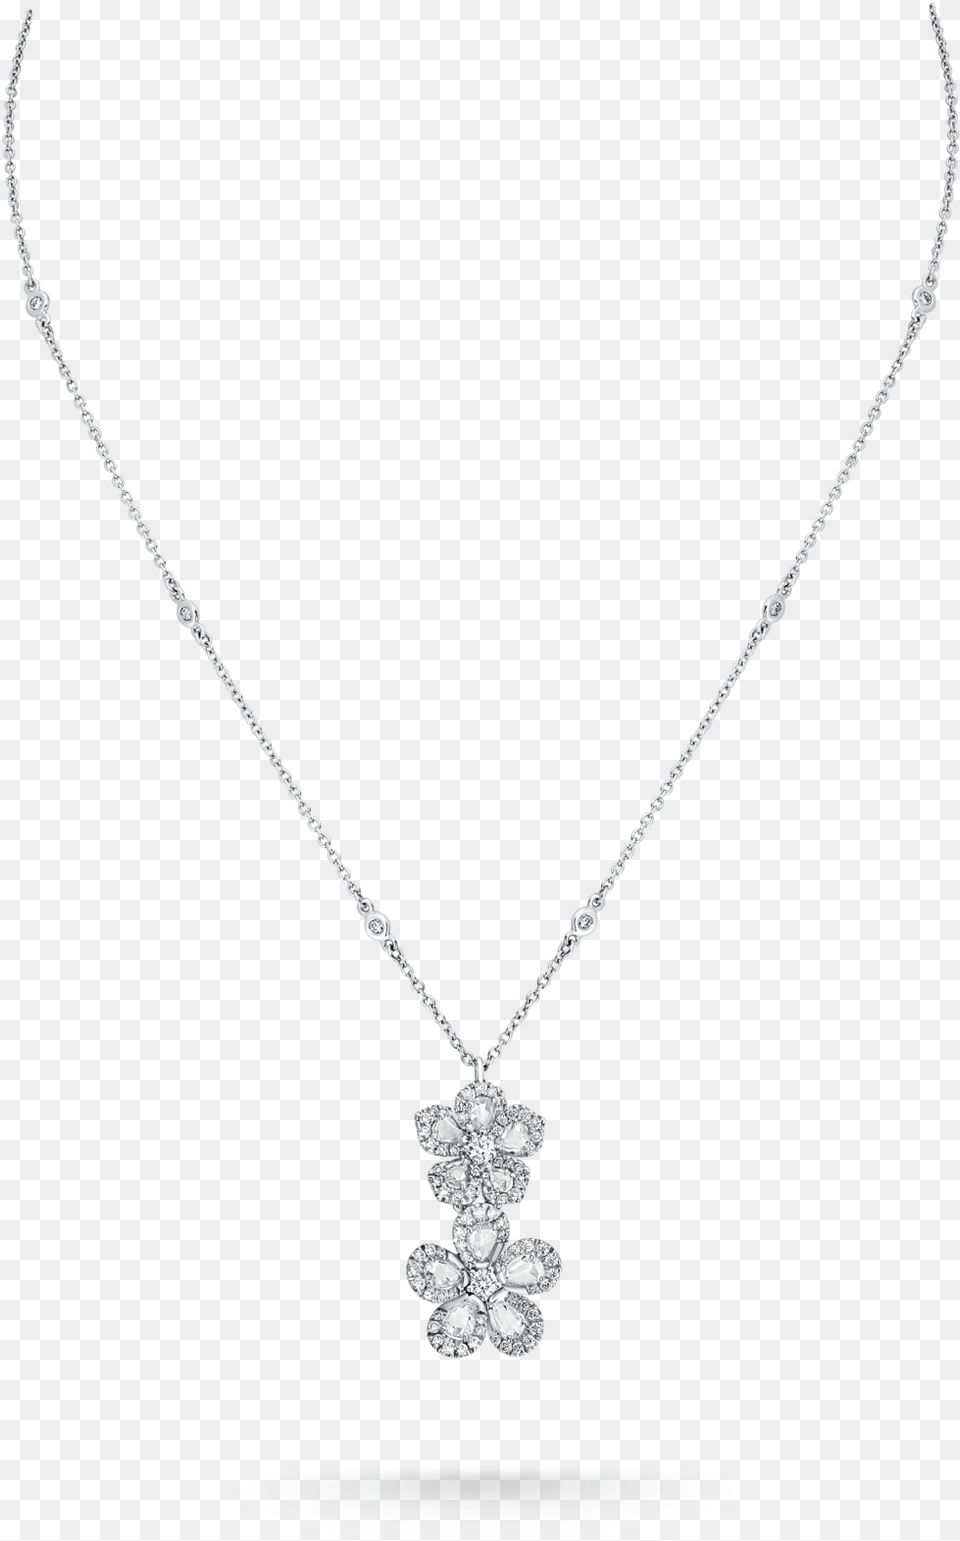 Ms 10 008 01 F1 Miss Daisy Necklace Pendant, Accessories, Diamond, Gemstone, Jewelry Png Image